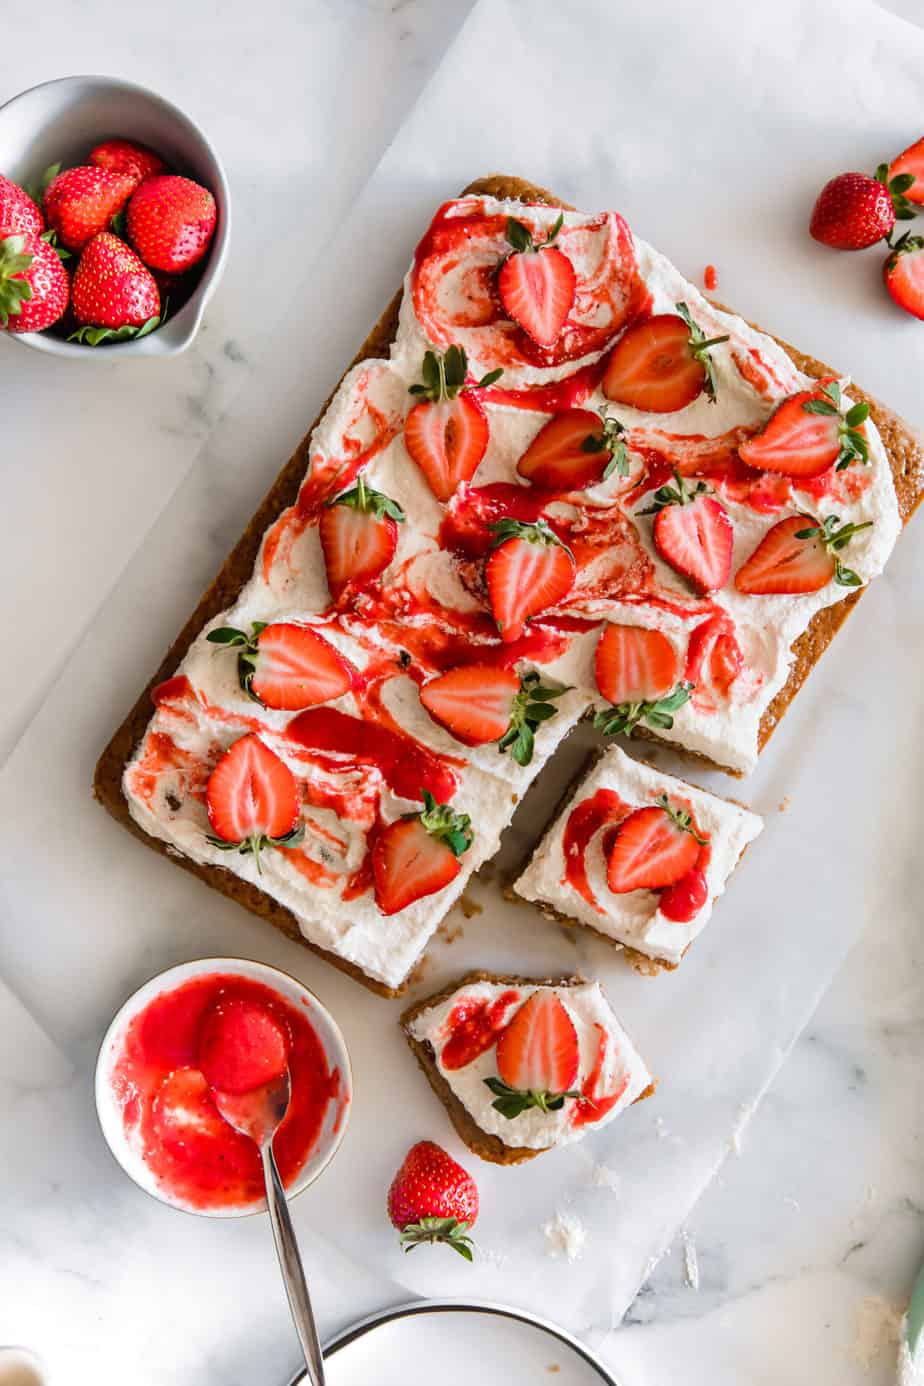 A strawberry lemon sheet cake with strawberry puree and fresh strawberries.